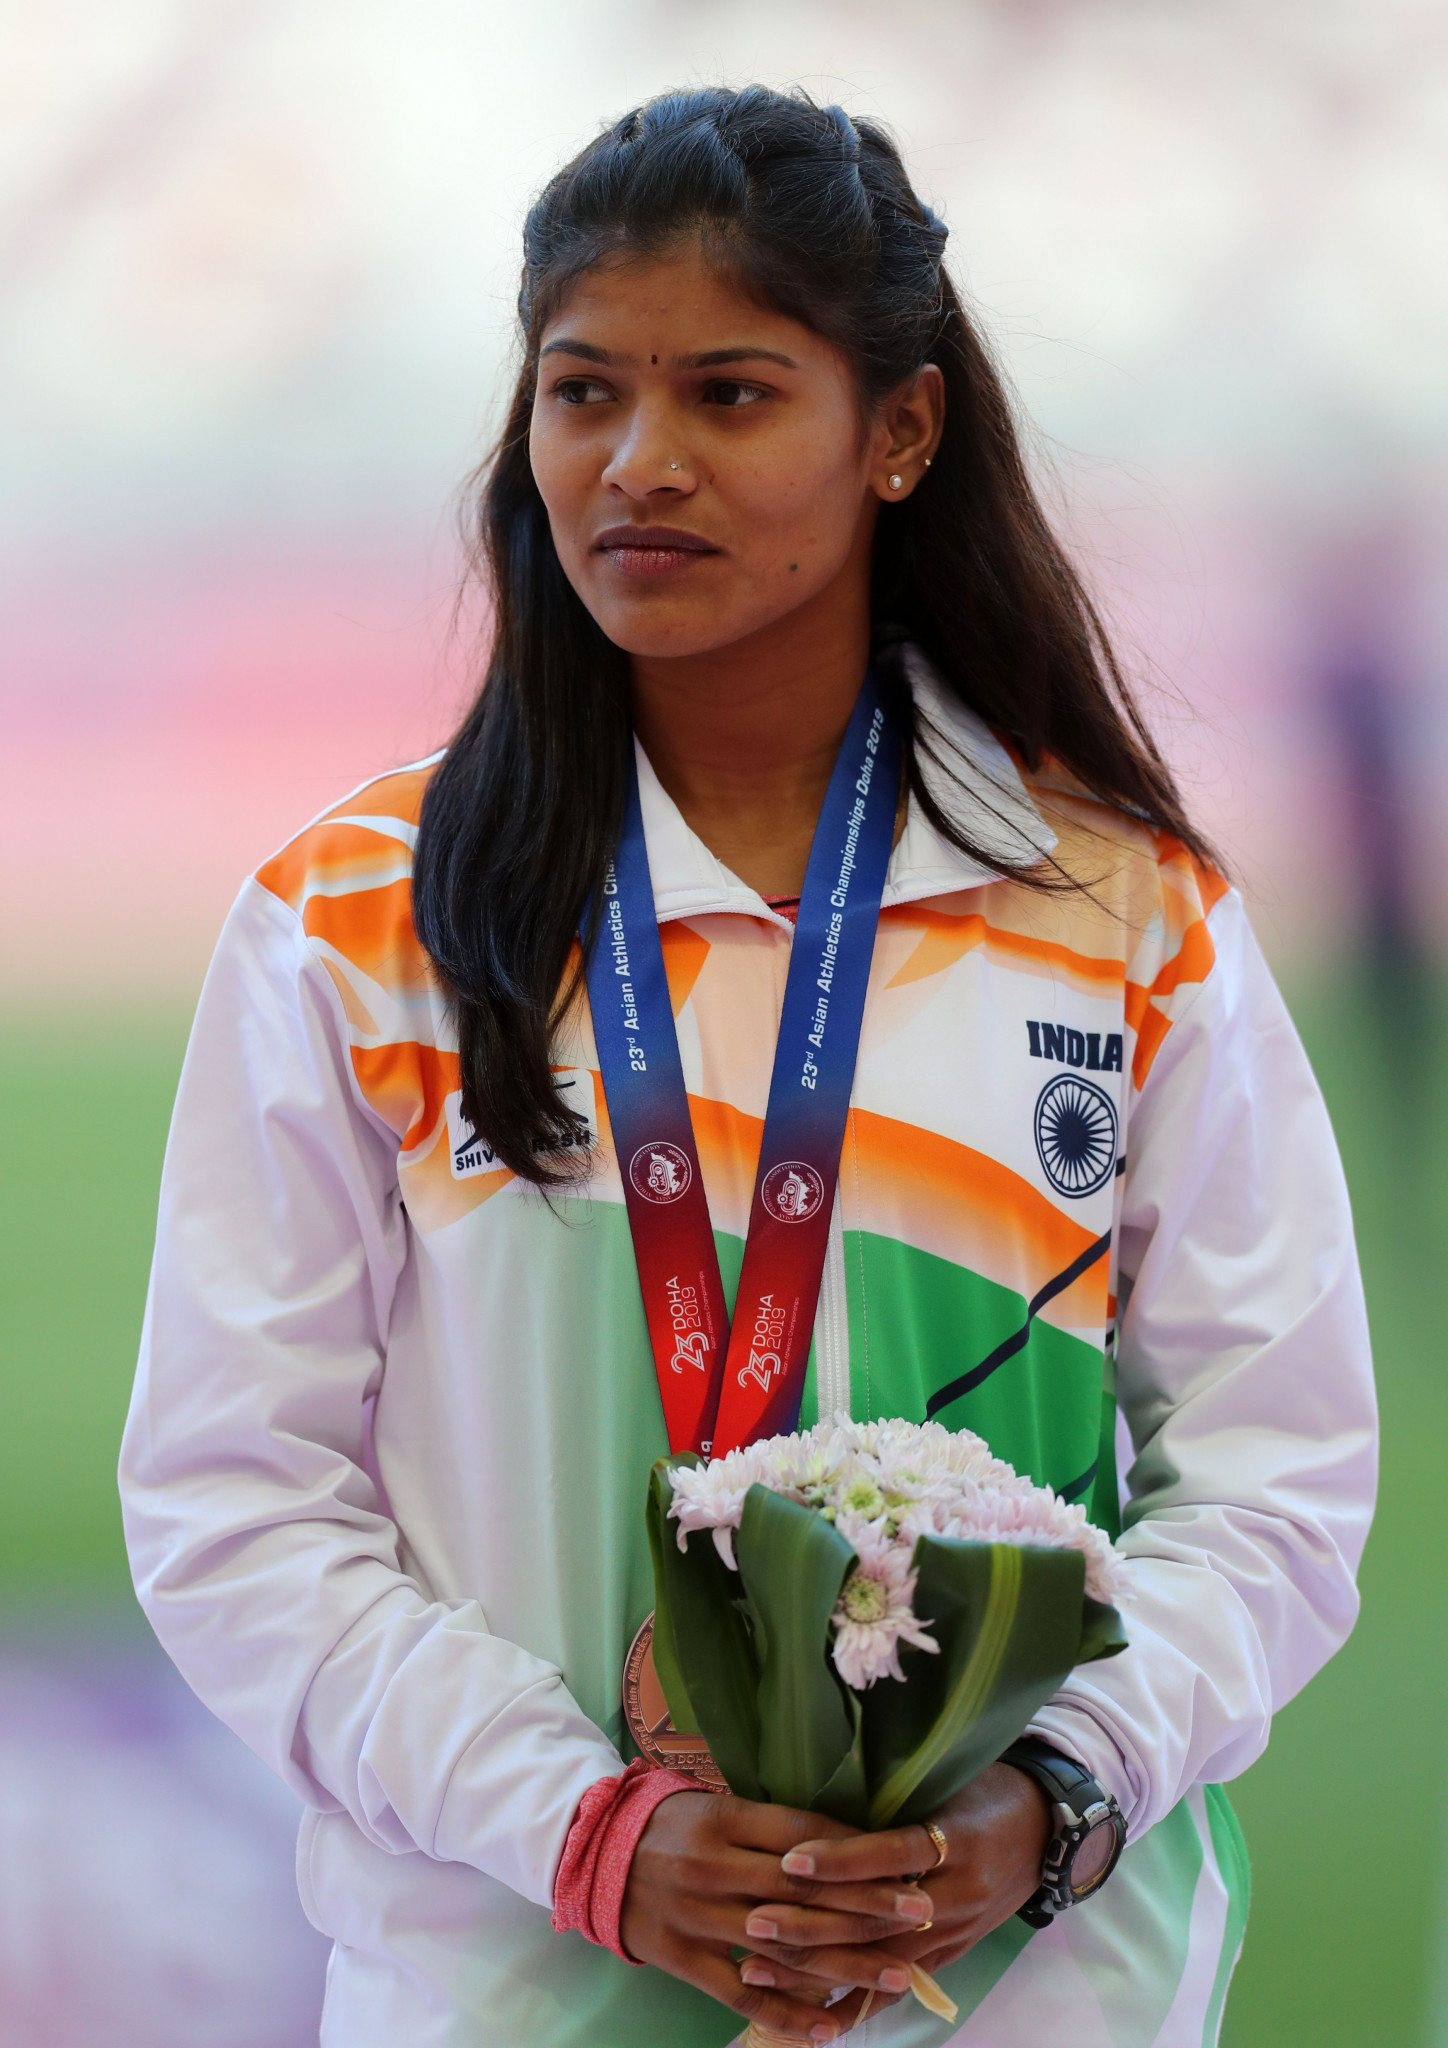 Indian long-distance runner Sanjivani Jadhav has been banned for two years by the Athletics Integrity Unit for a doping violation ©Getty Images